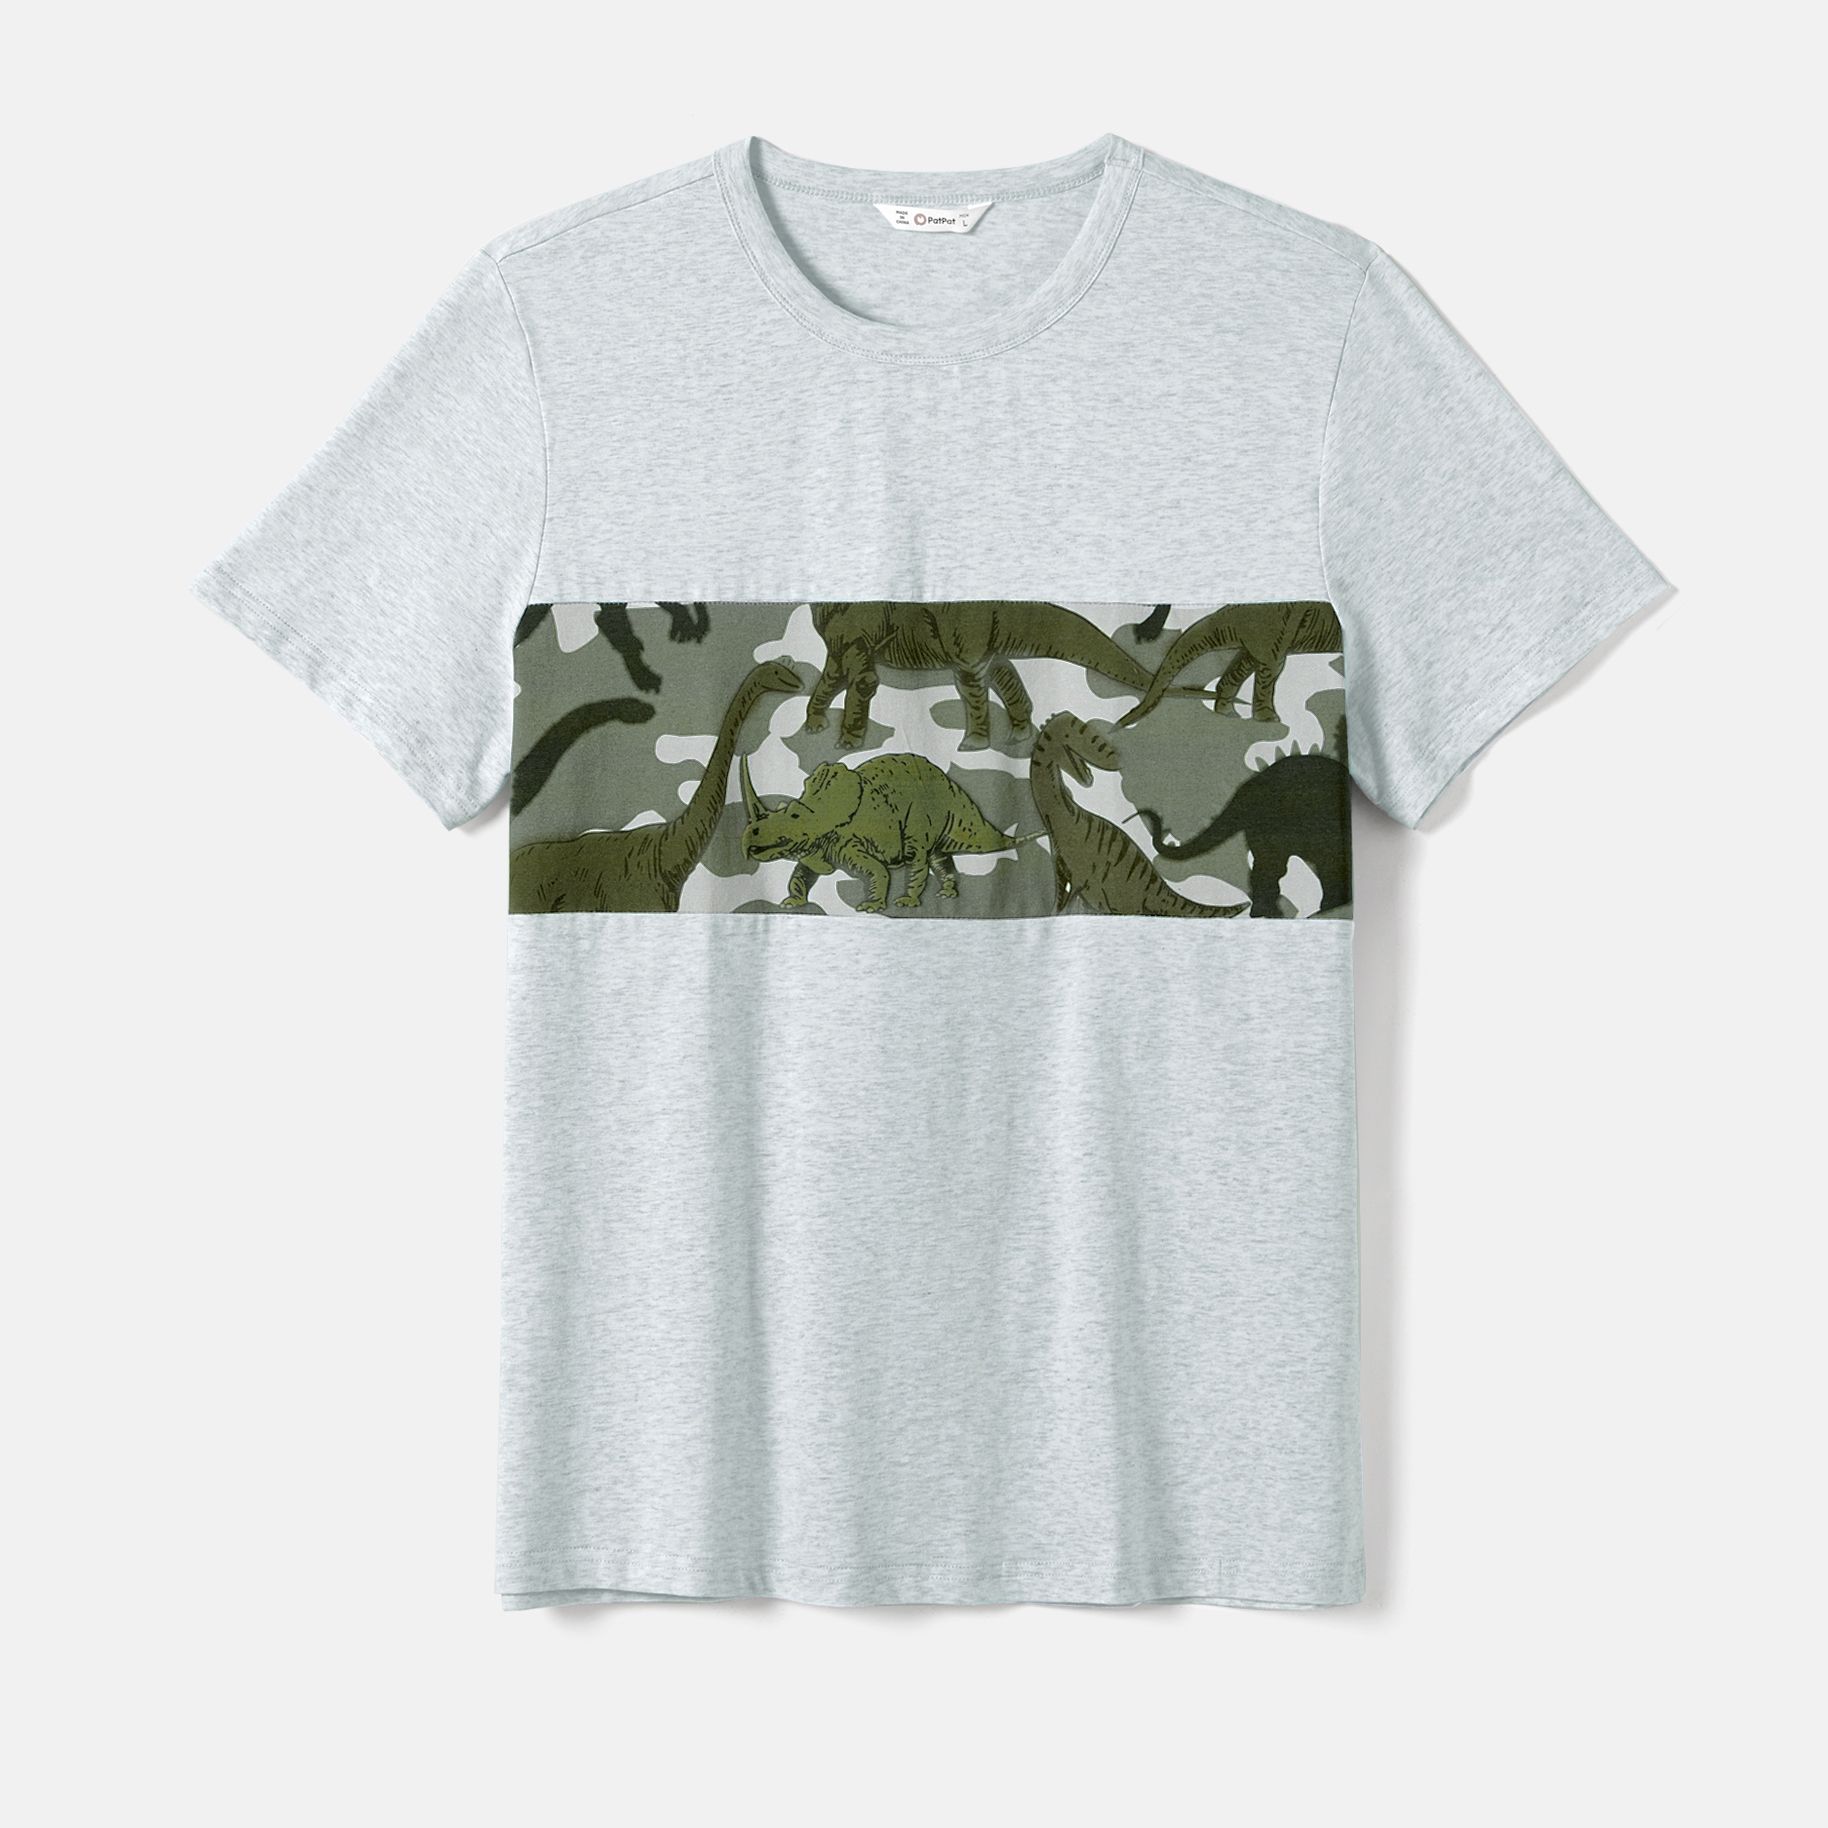 Family Matching Dinosaur Print Camouflage Halterneck Dresses And Short-sleeve T-shirts Sets